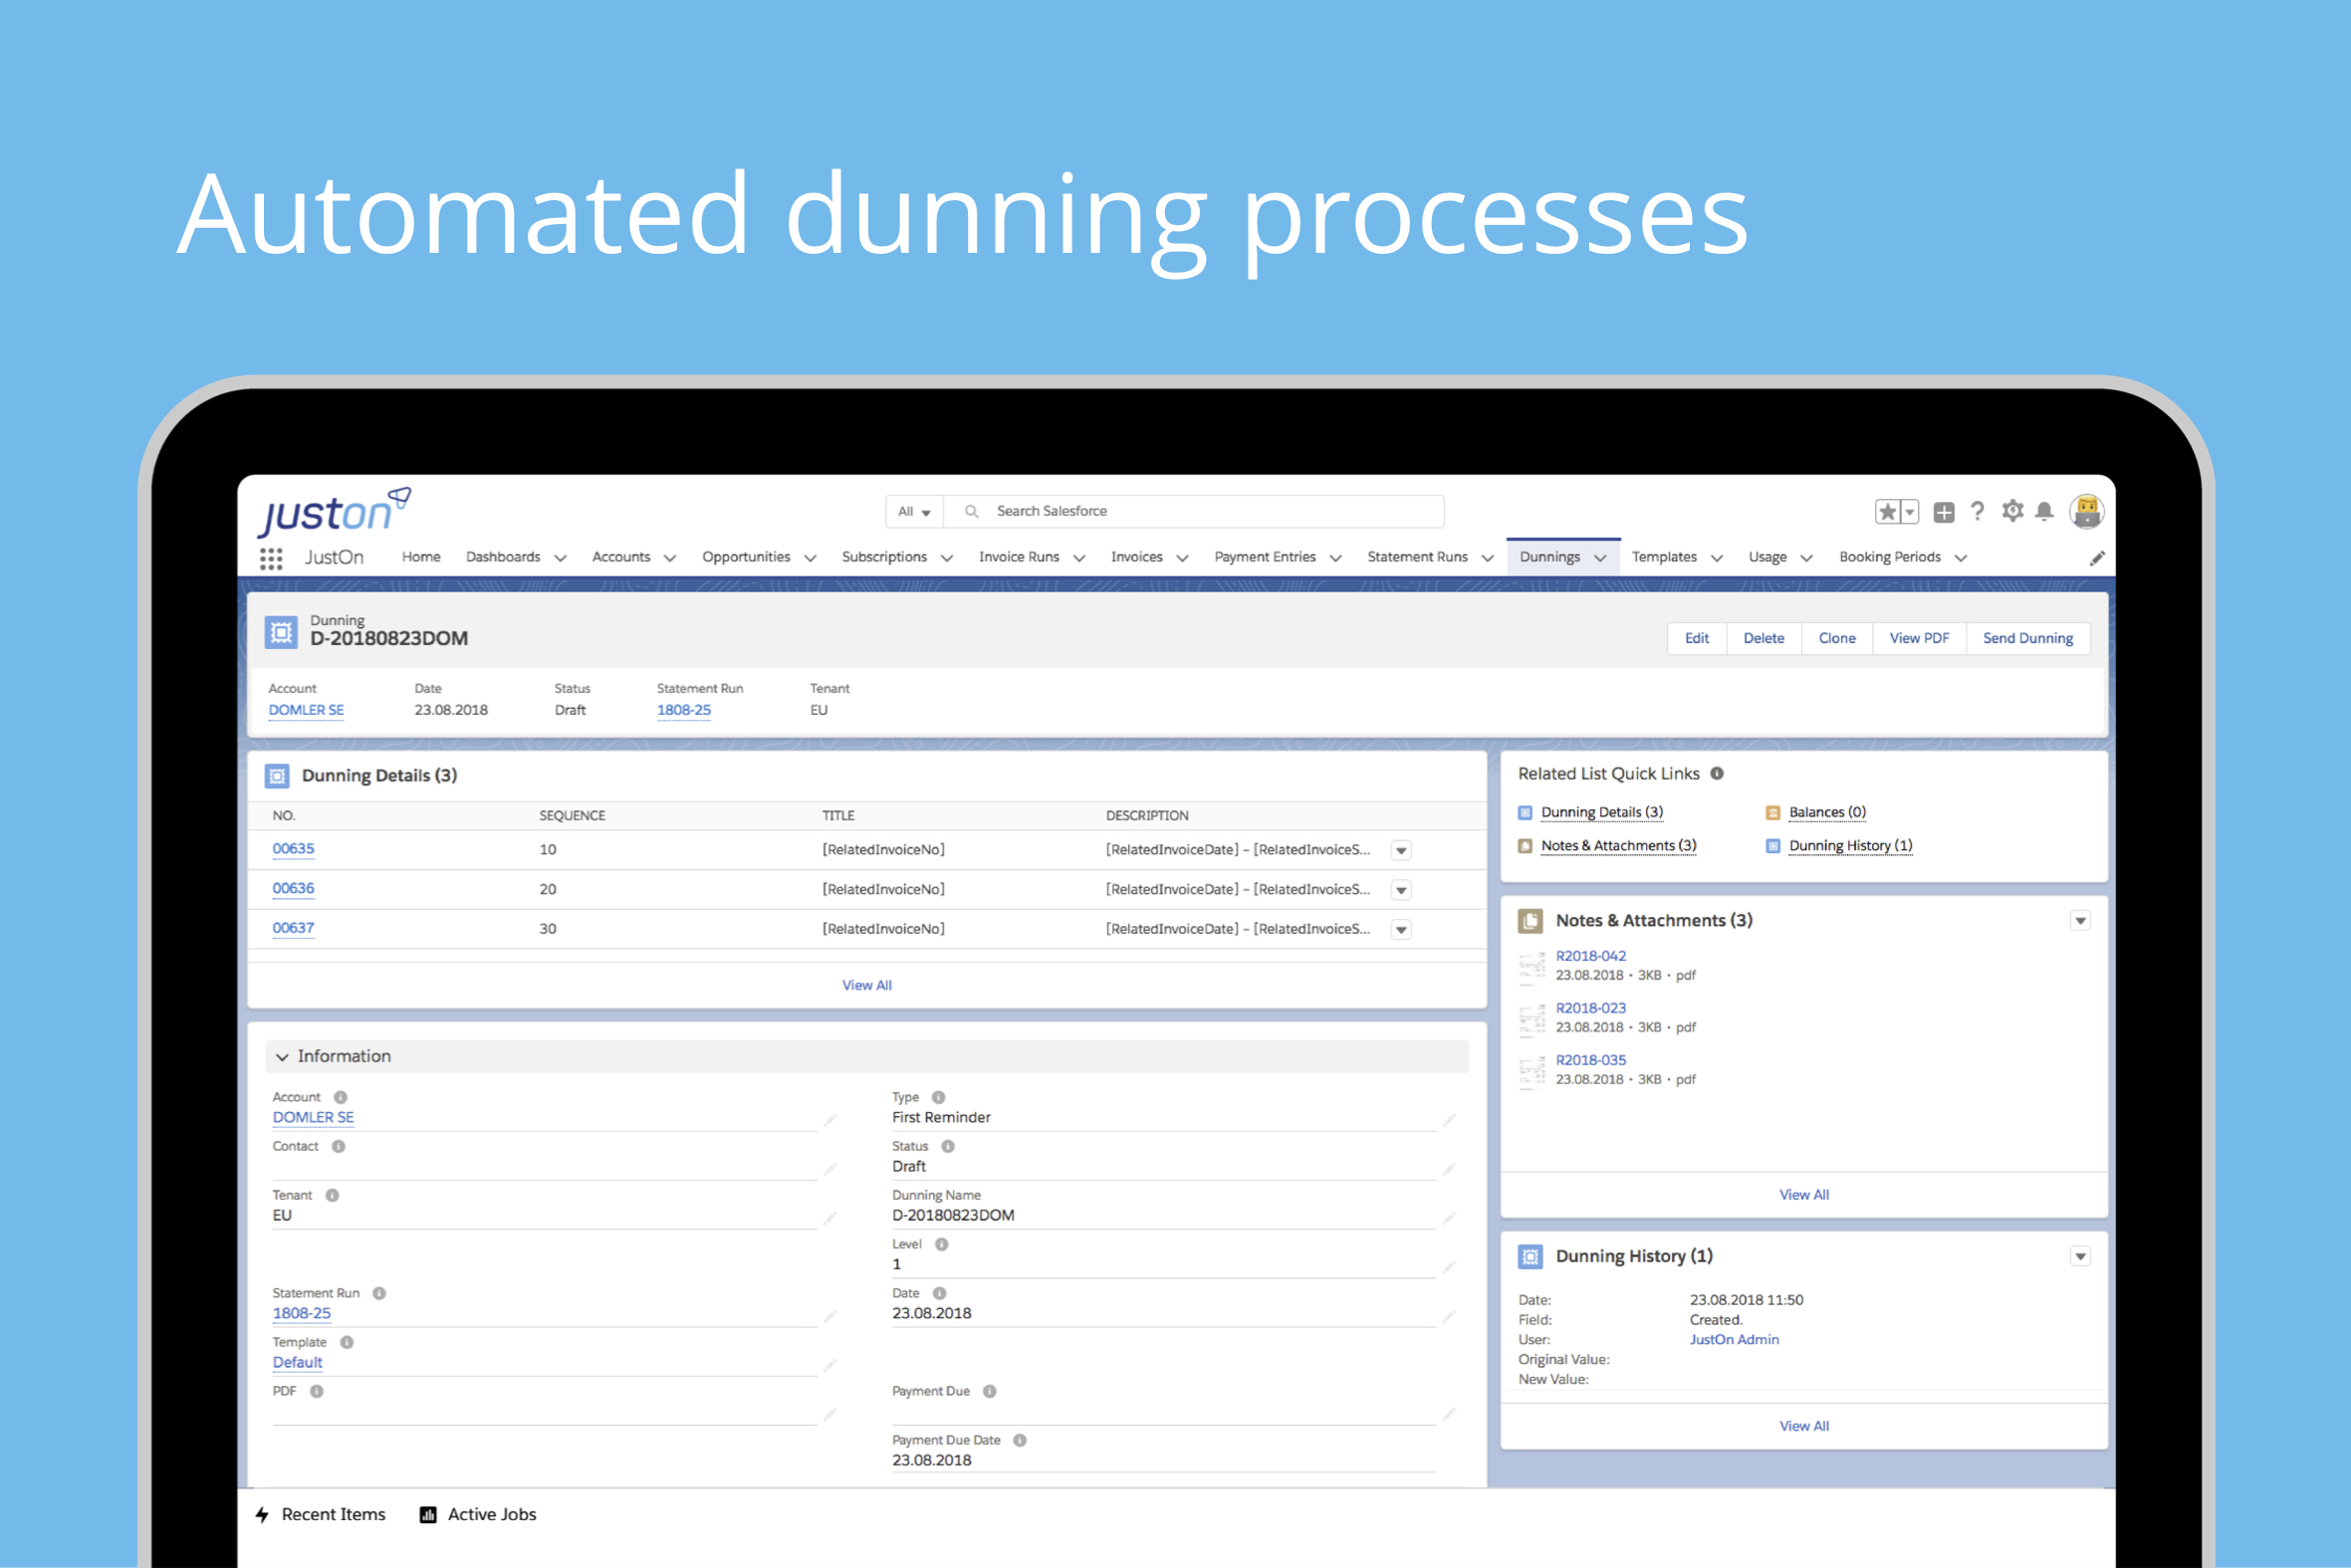 JustOn automated dunning runs and configurable dunning fees